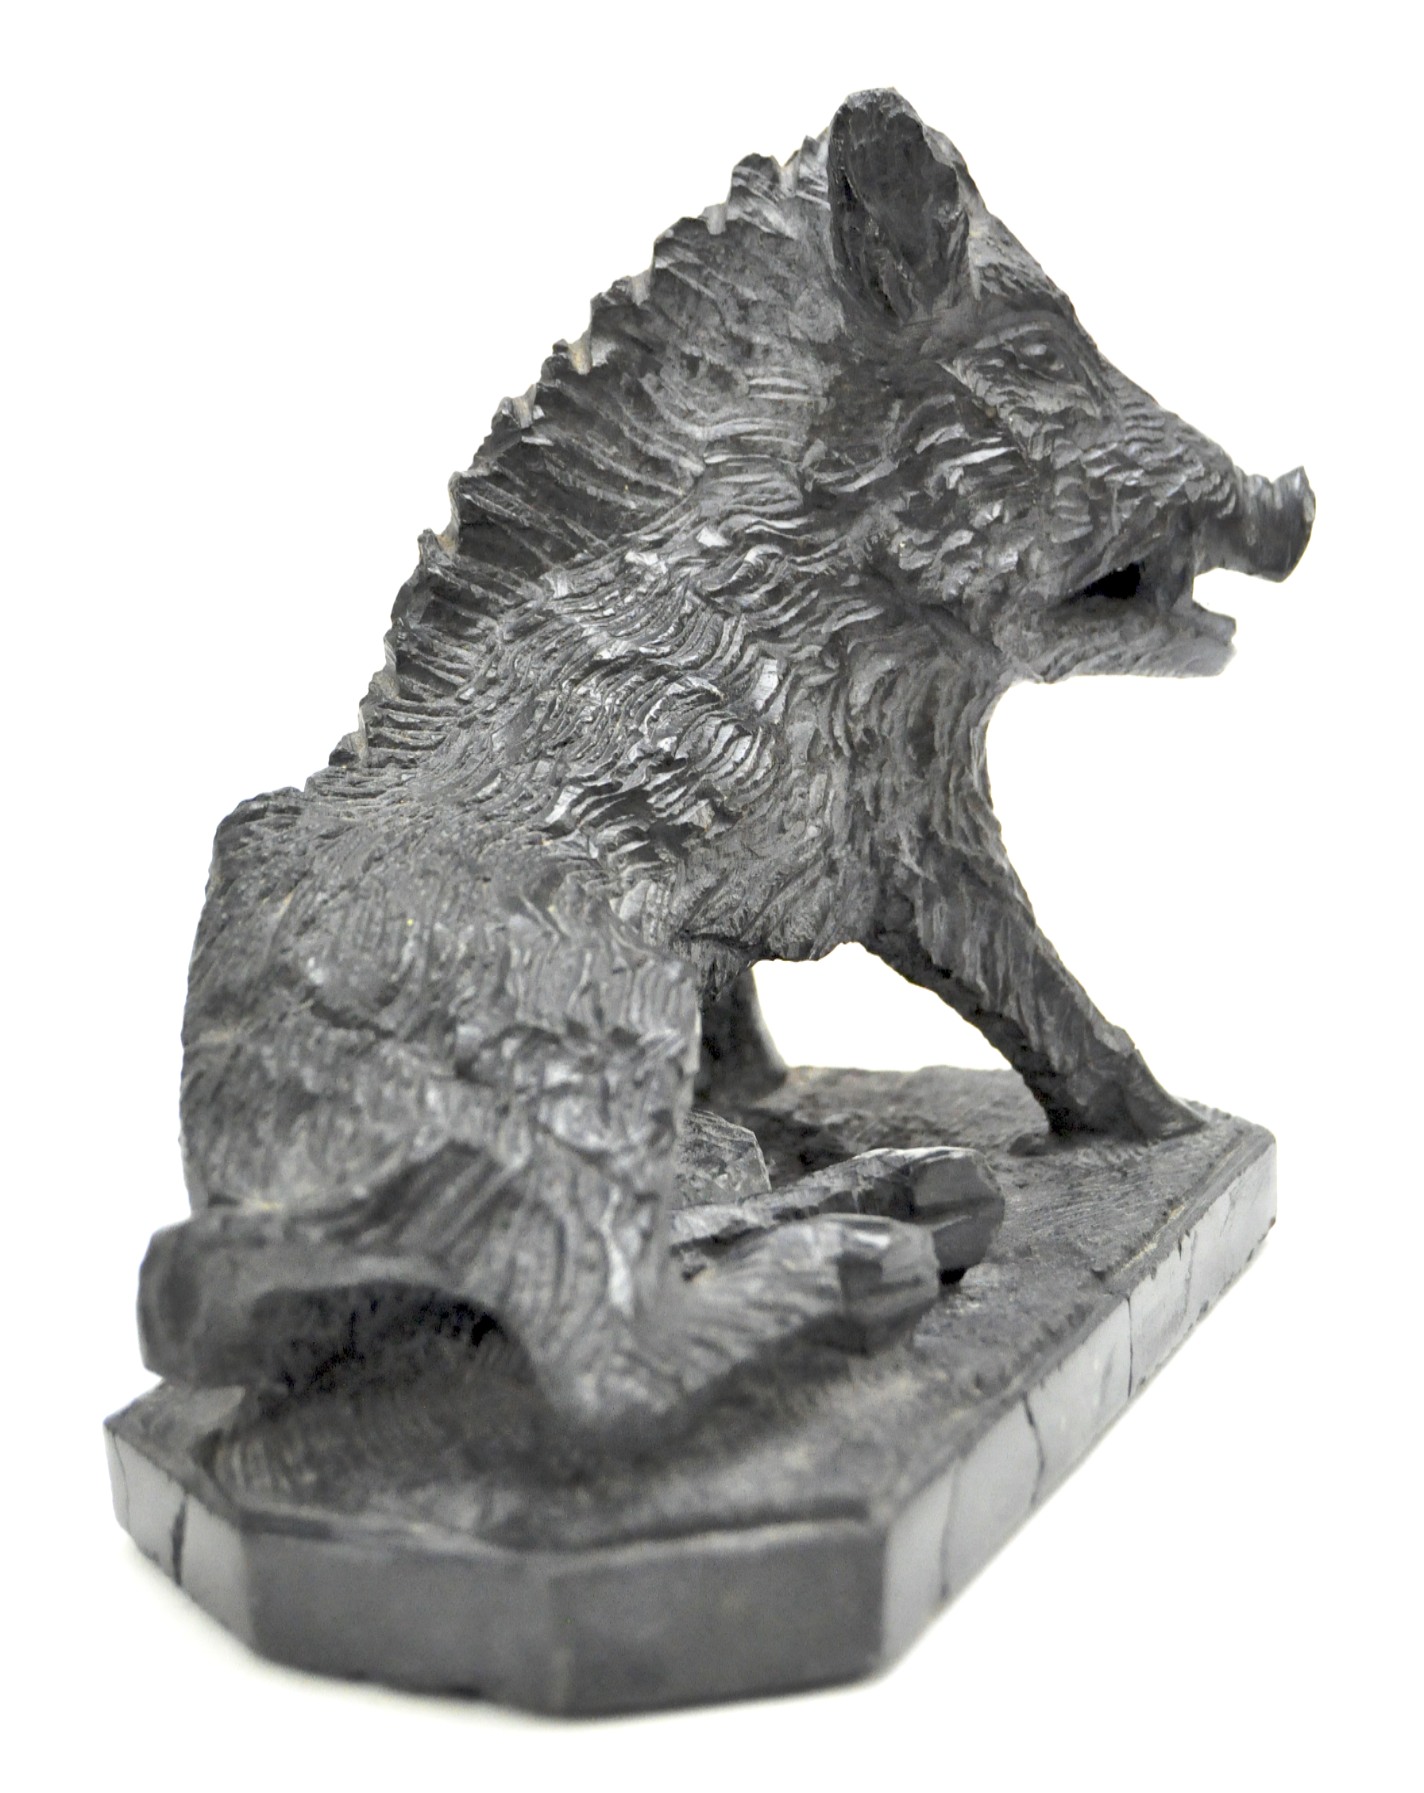 A vintage stone sculpture modelled as a wild boar, - Image 3 of 3